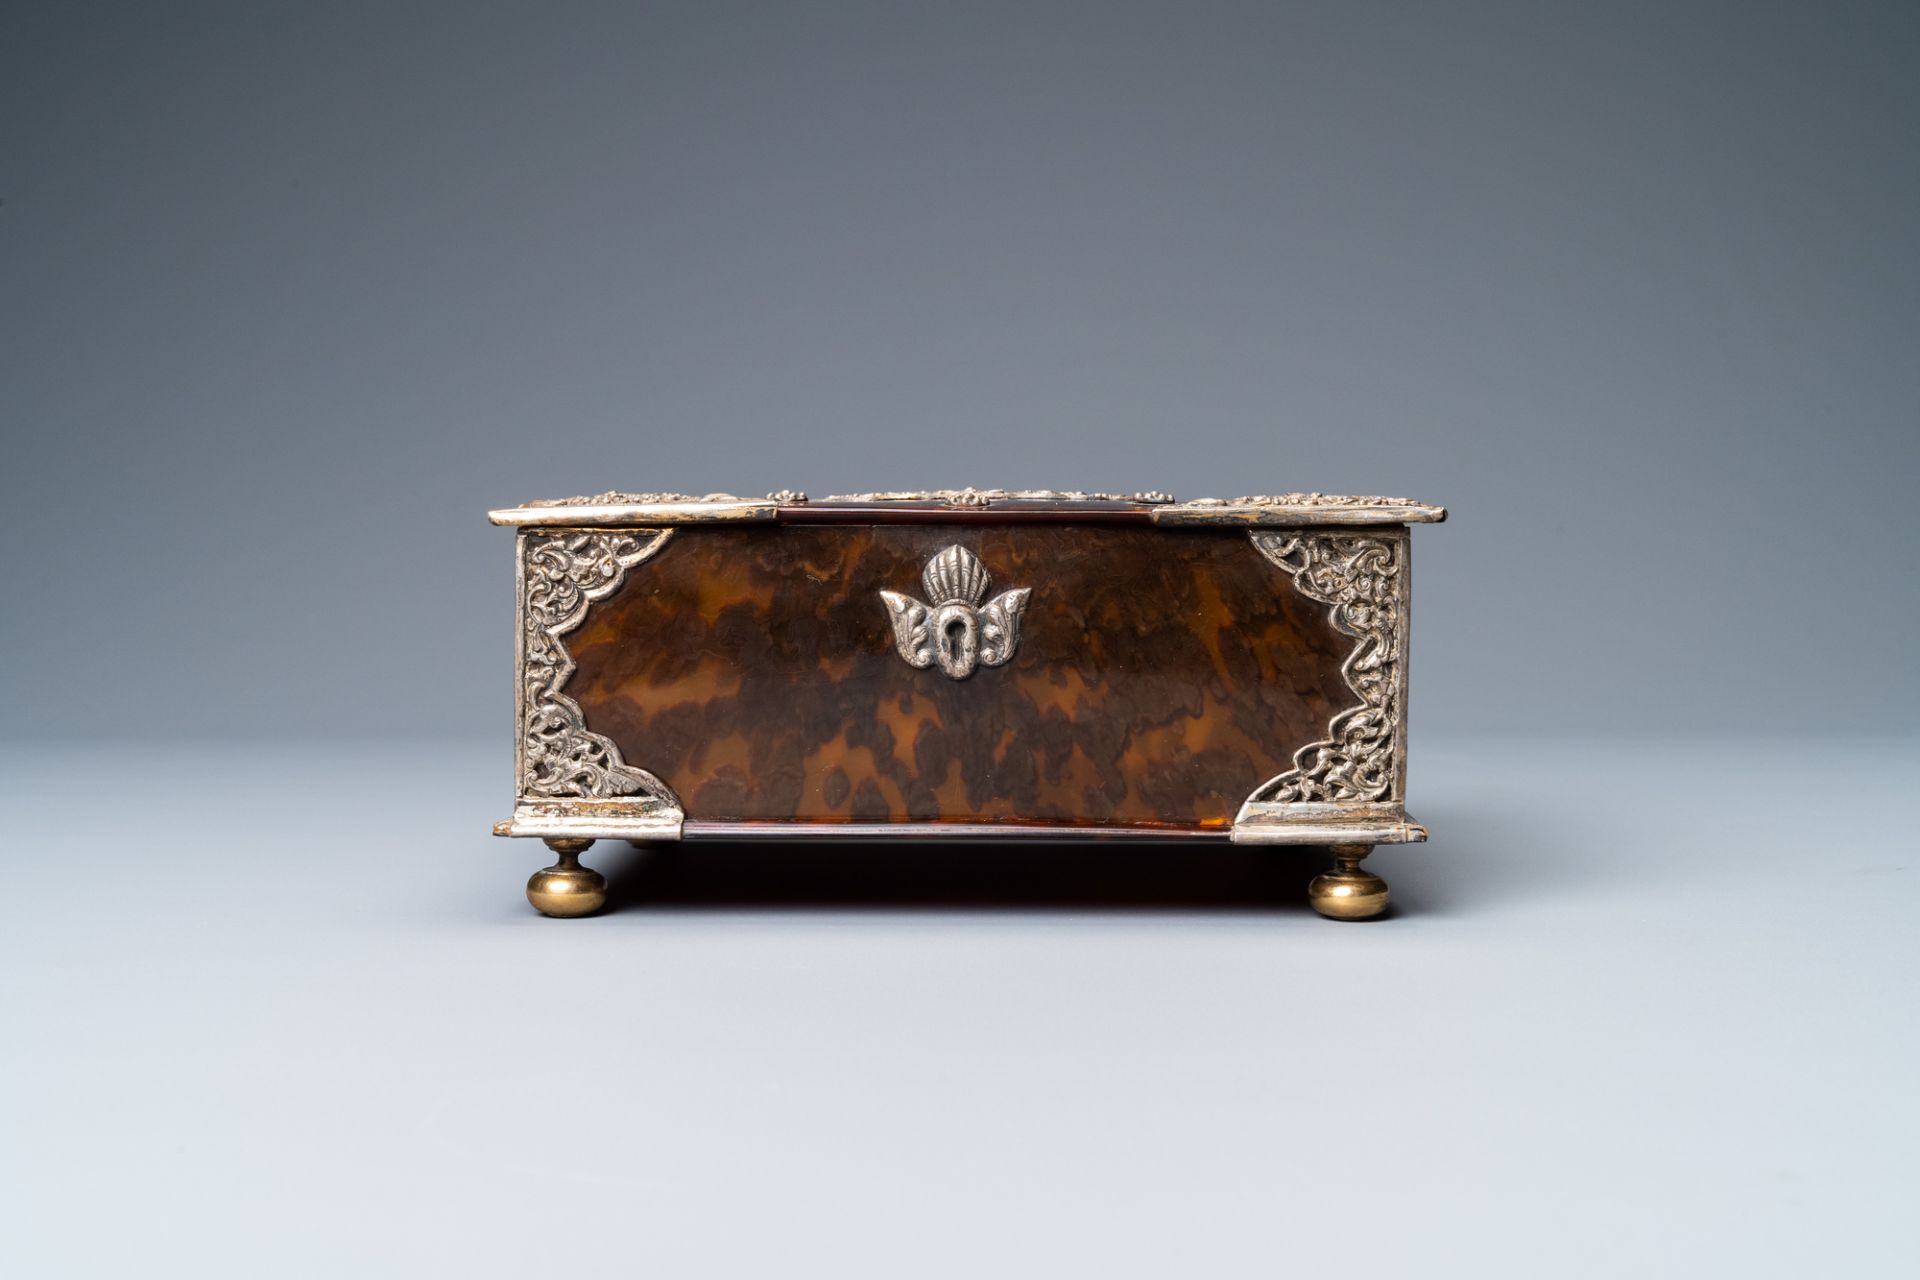 A Dutch colonial silver-mounted tortoise shell sirih casket, ca. 1700 - Image 5 of 10